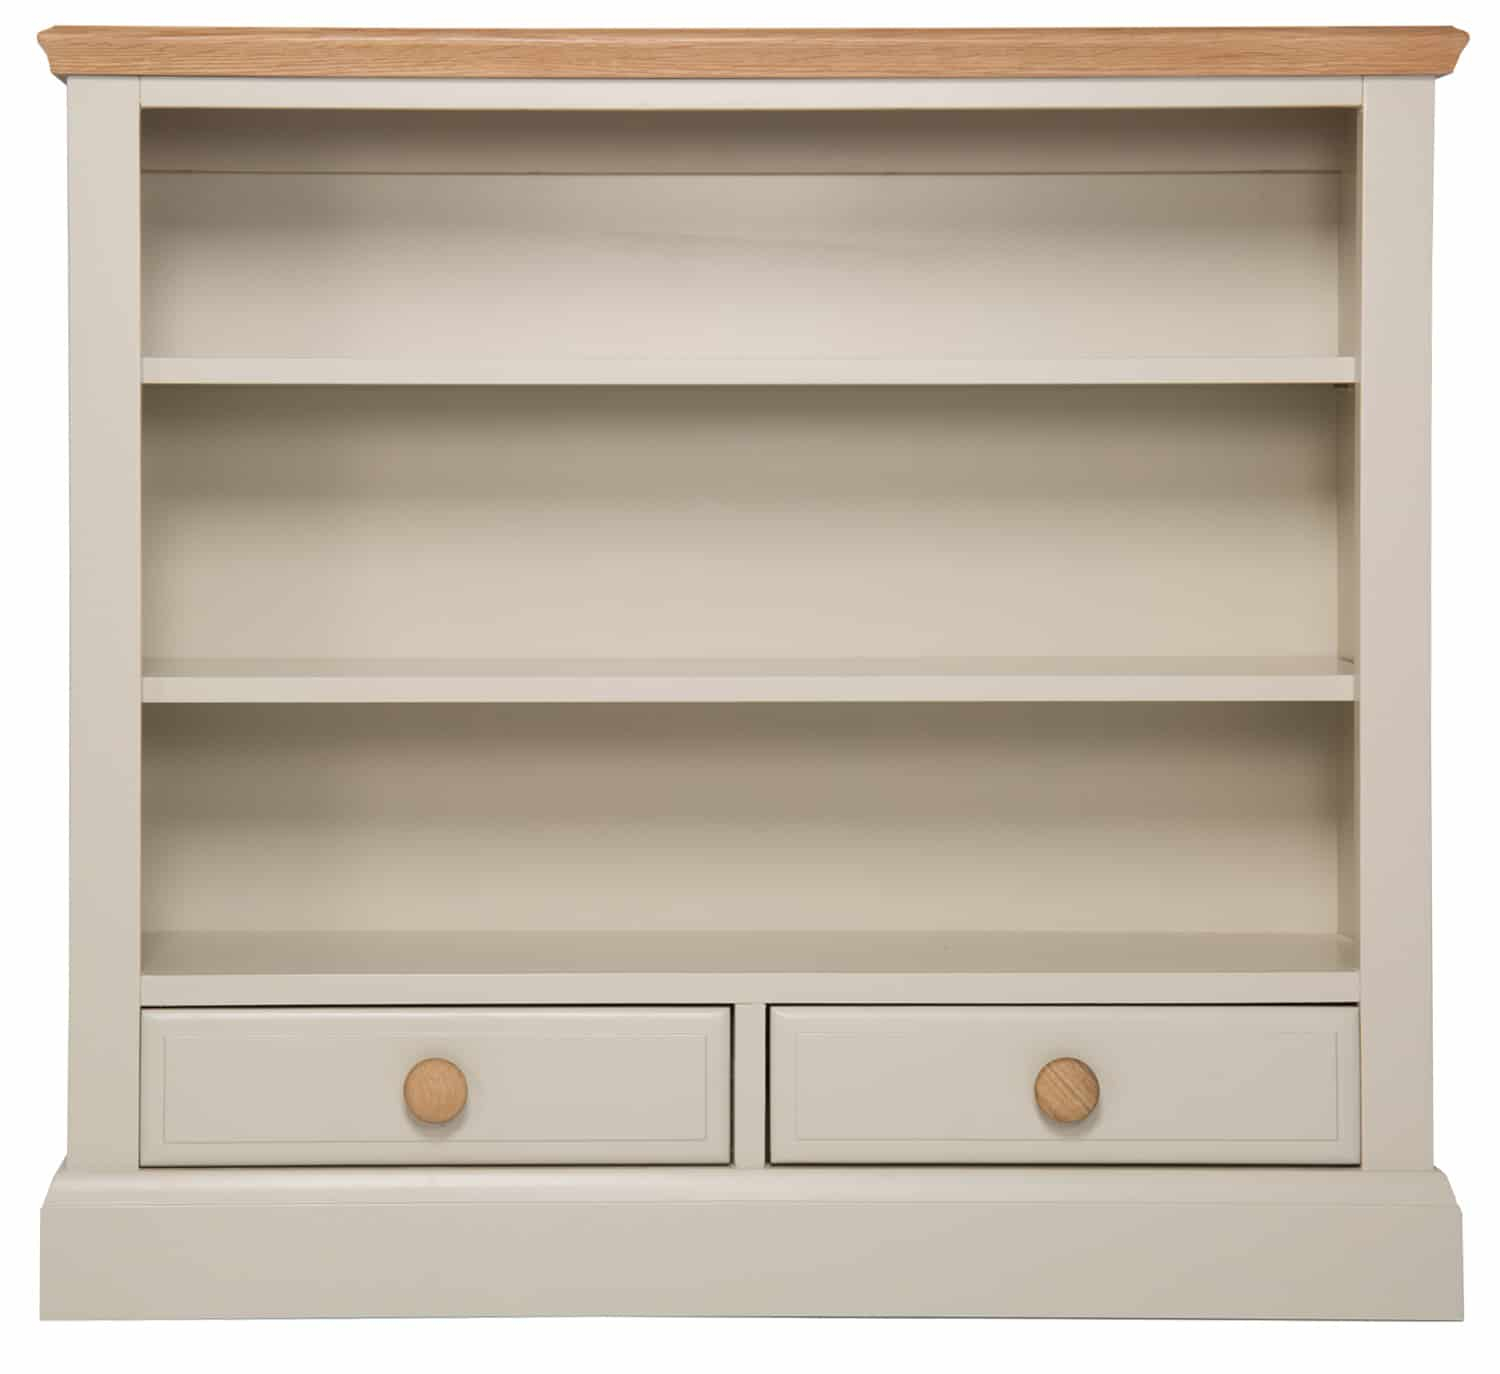 Dorset Stone Painted Oak Small Low Open Bookcase Display Unit With Drawers intended for proportions 1500 X 1374